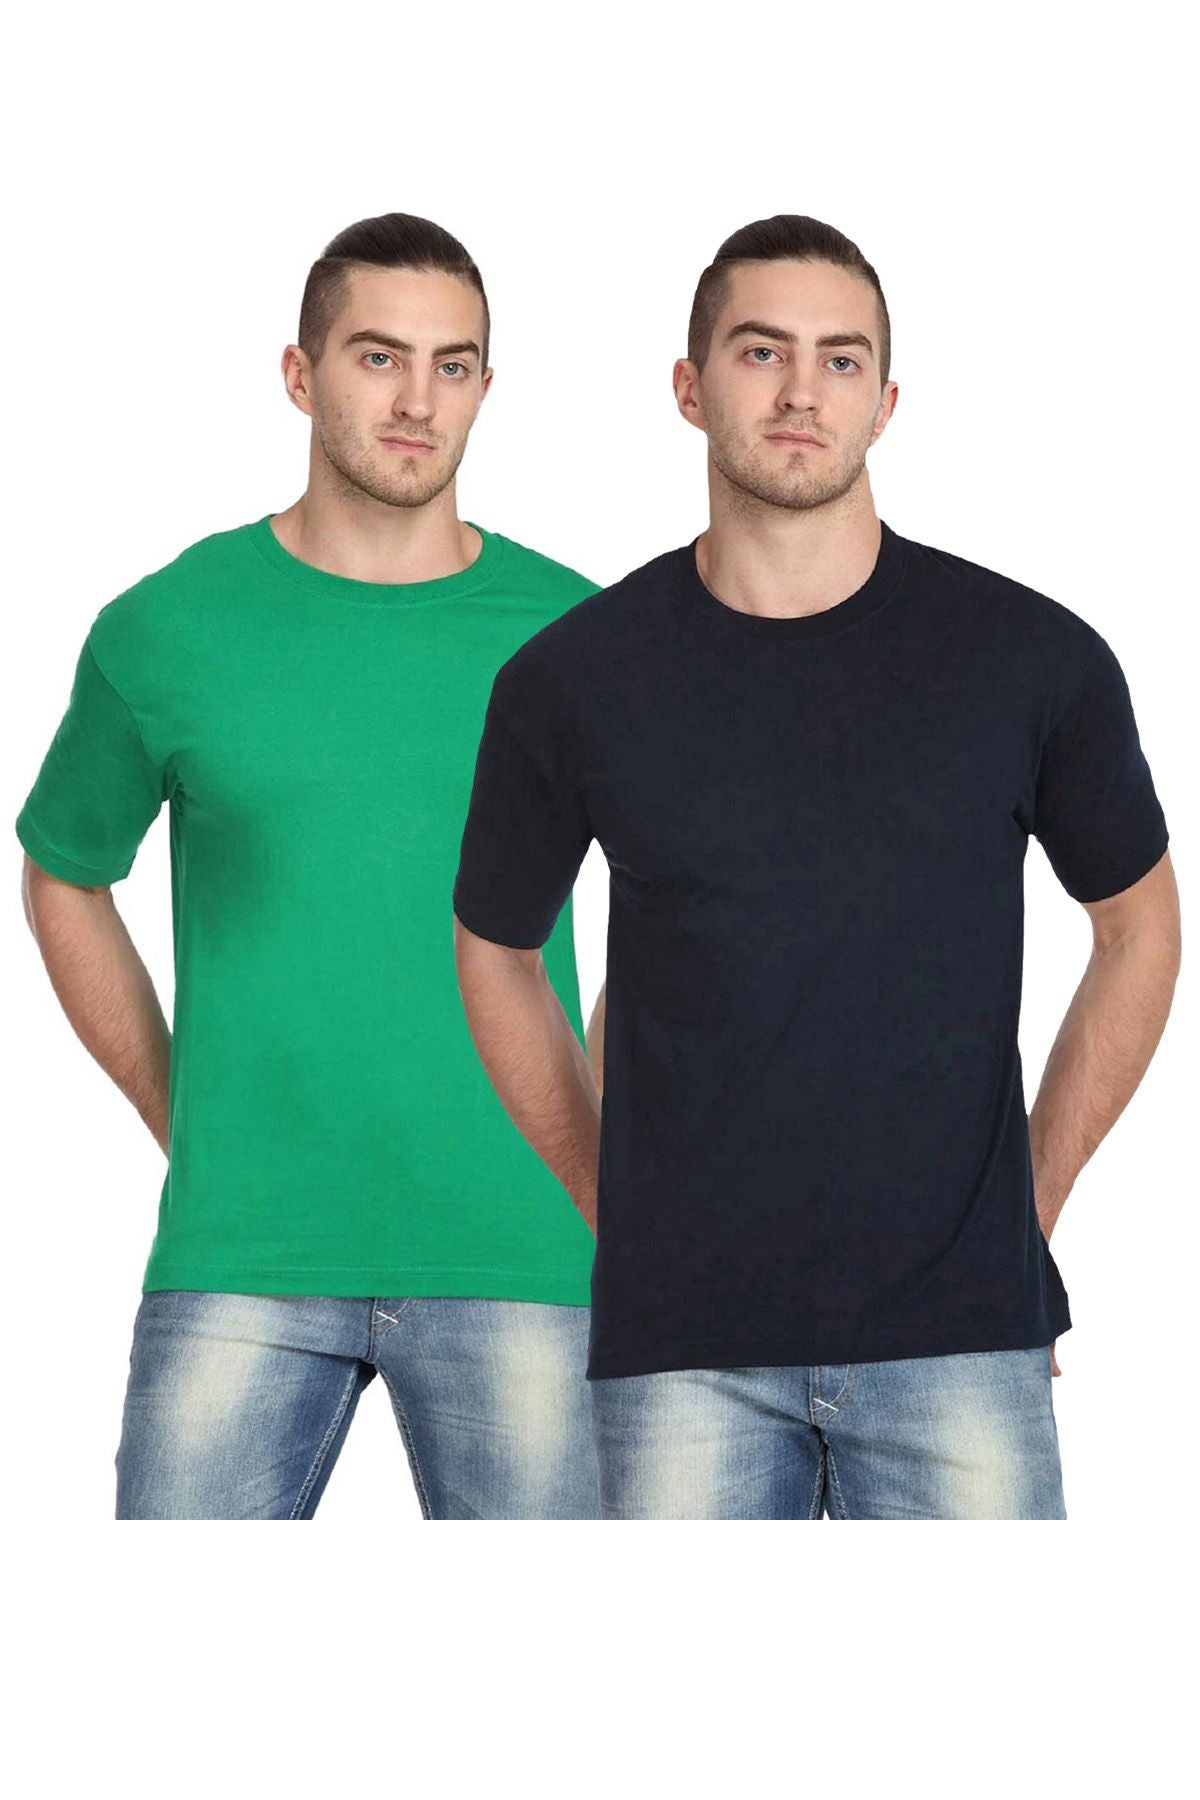 Multus  Mens Solid Round Neck Polyester White T-shirt Pack Of 2  Breen  Black